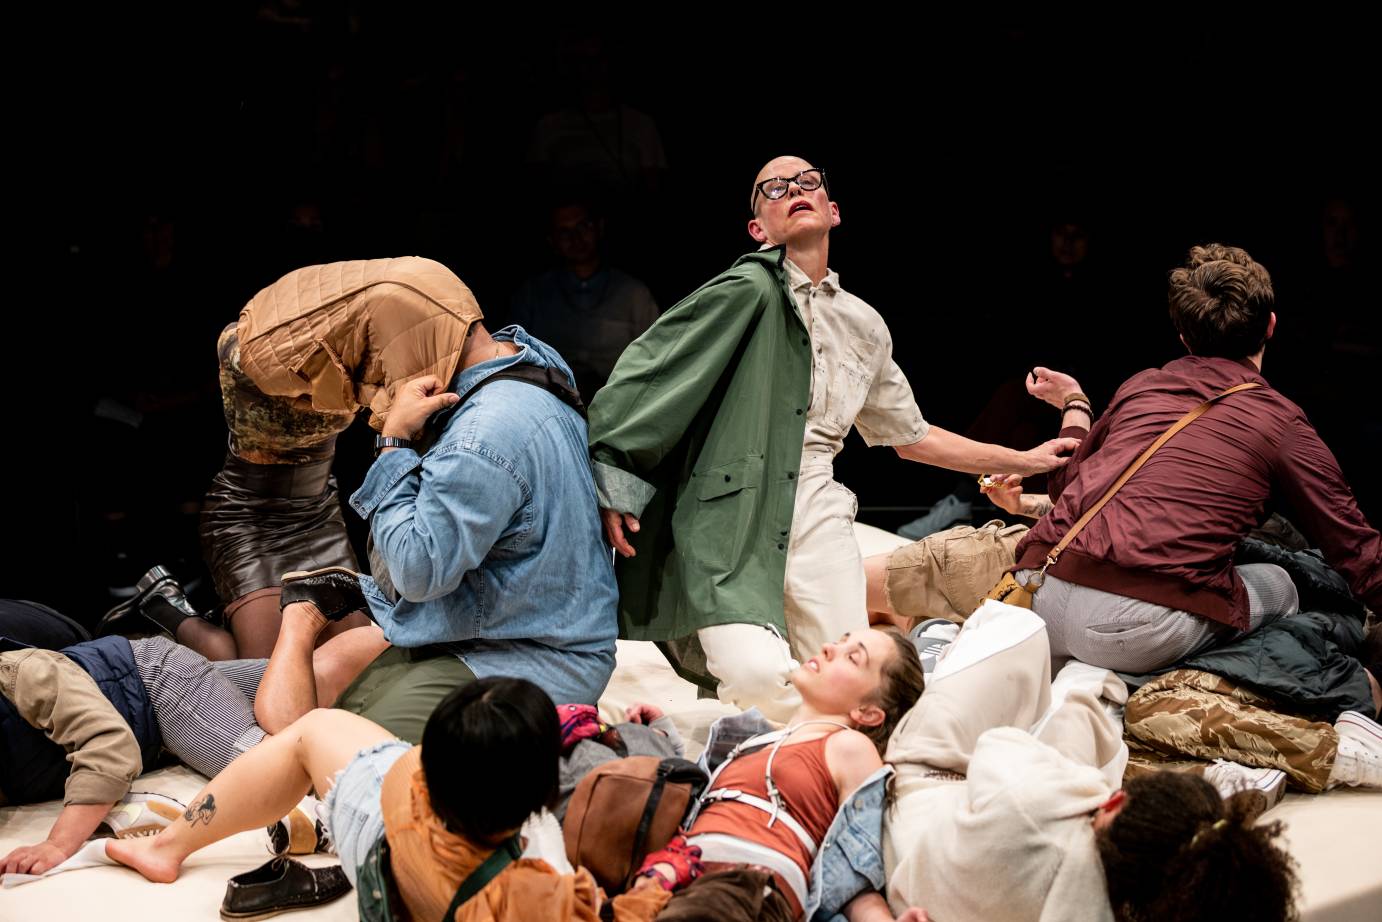 Intertwined performers atop a spongy white platform. A central figure is a white shaved head woman wearing black framed glasses and a green canvas coat, a kneeling man wearing a blue denim shirt with a quilted gold coat over his head and a seated white brown haired man with his back to us in brown coat. At least four other performers in various states of undress and splayed on the platform